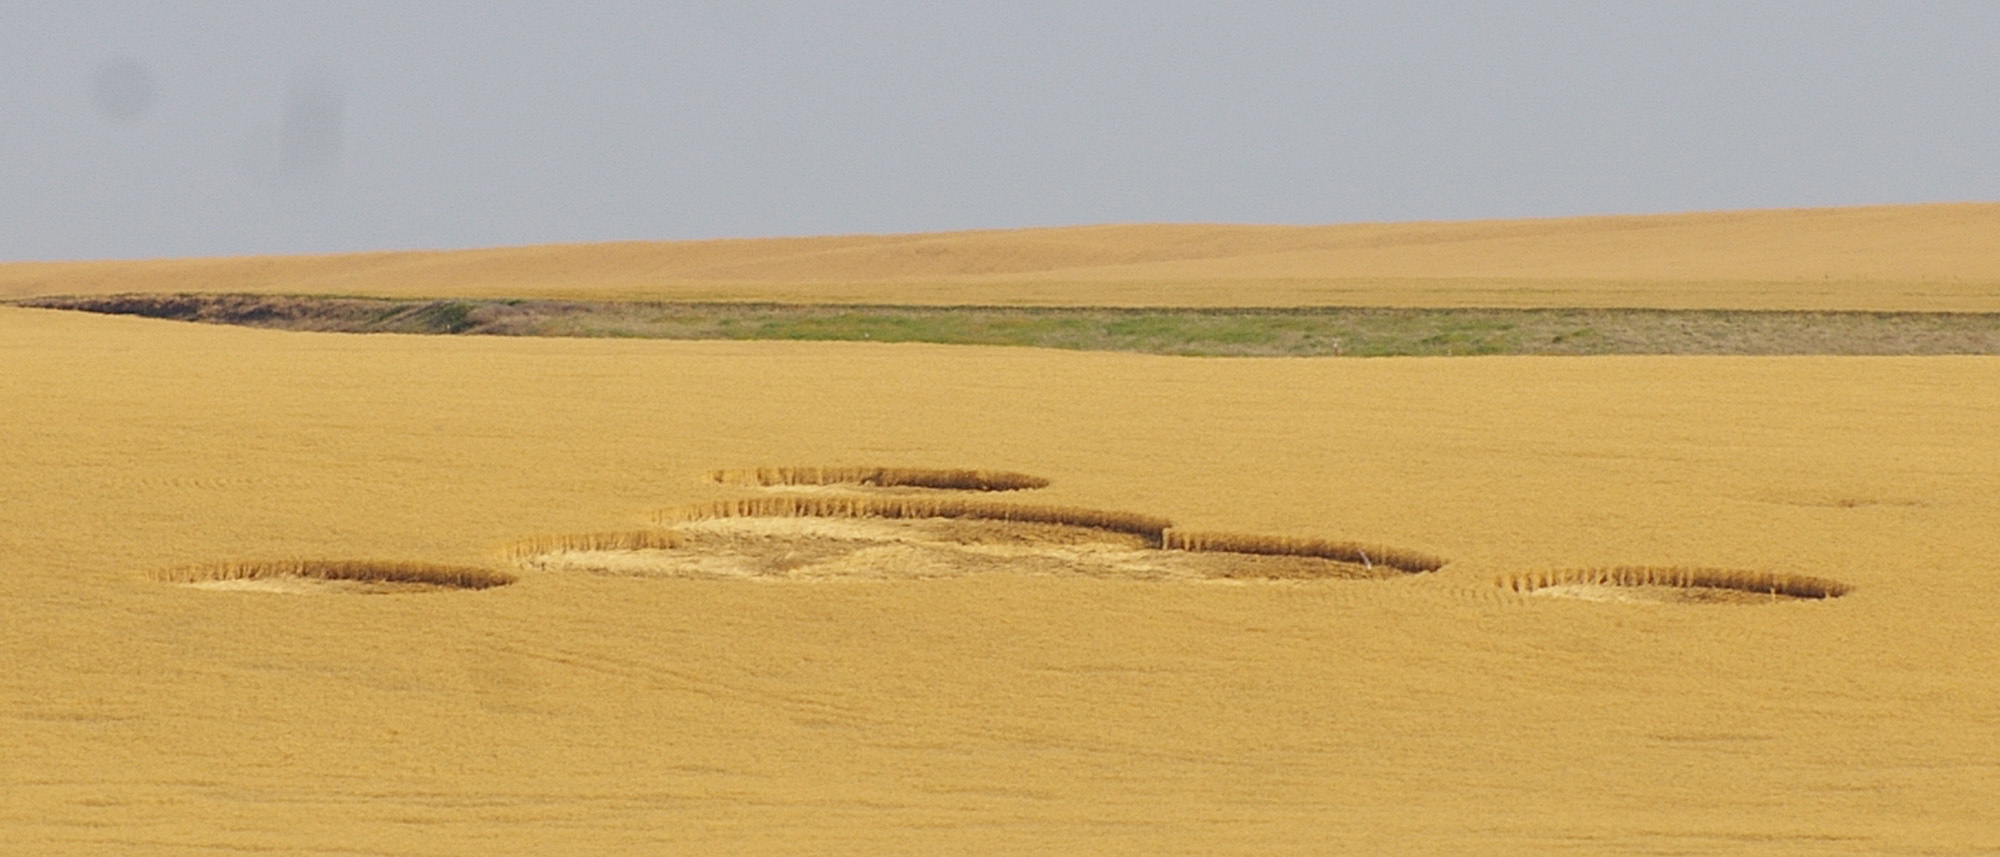 Crop circles are shown in a wheat field owned by Greg and Cindy Geib near Wilbur. The circles were first noticed on July 24.